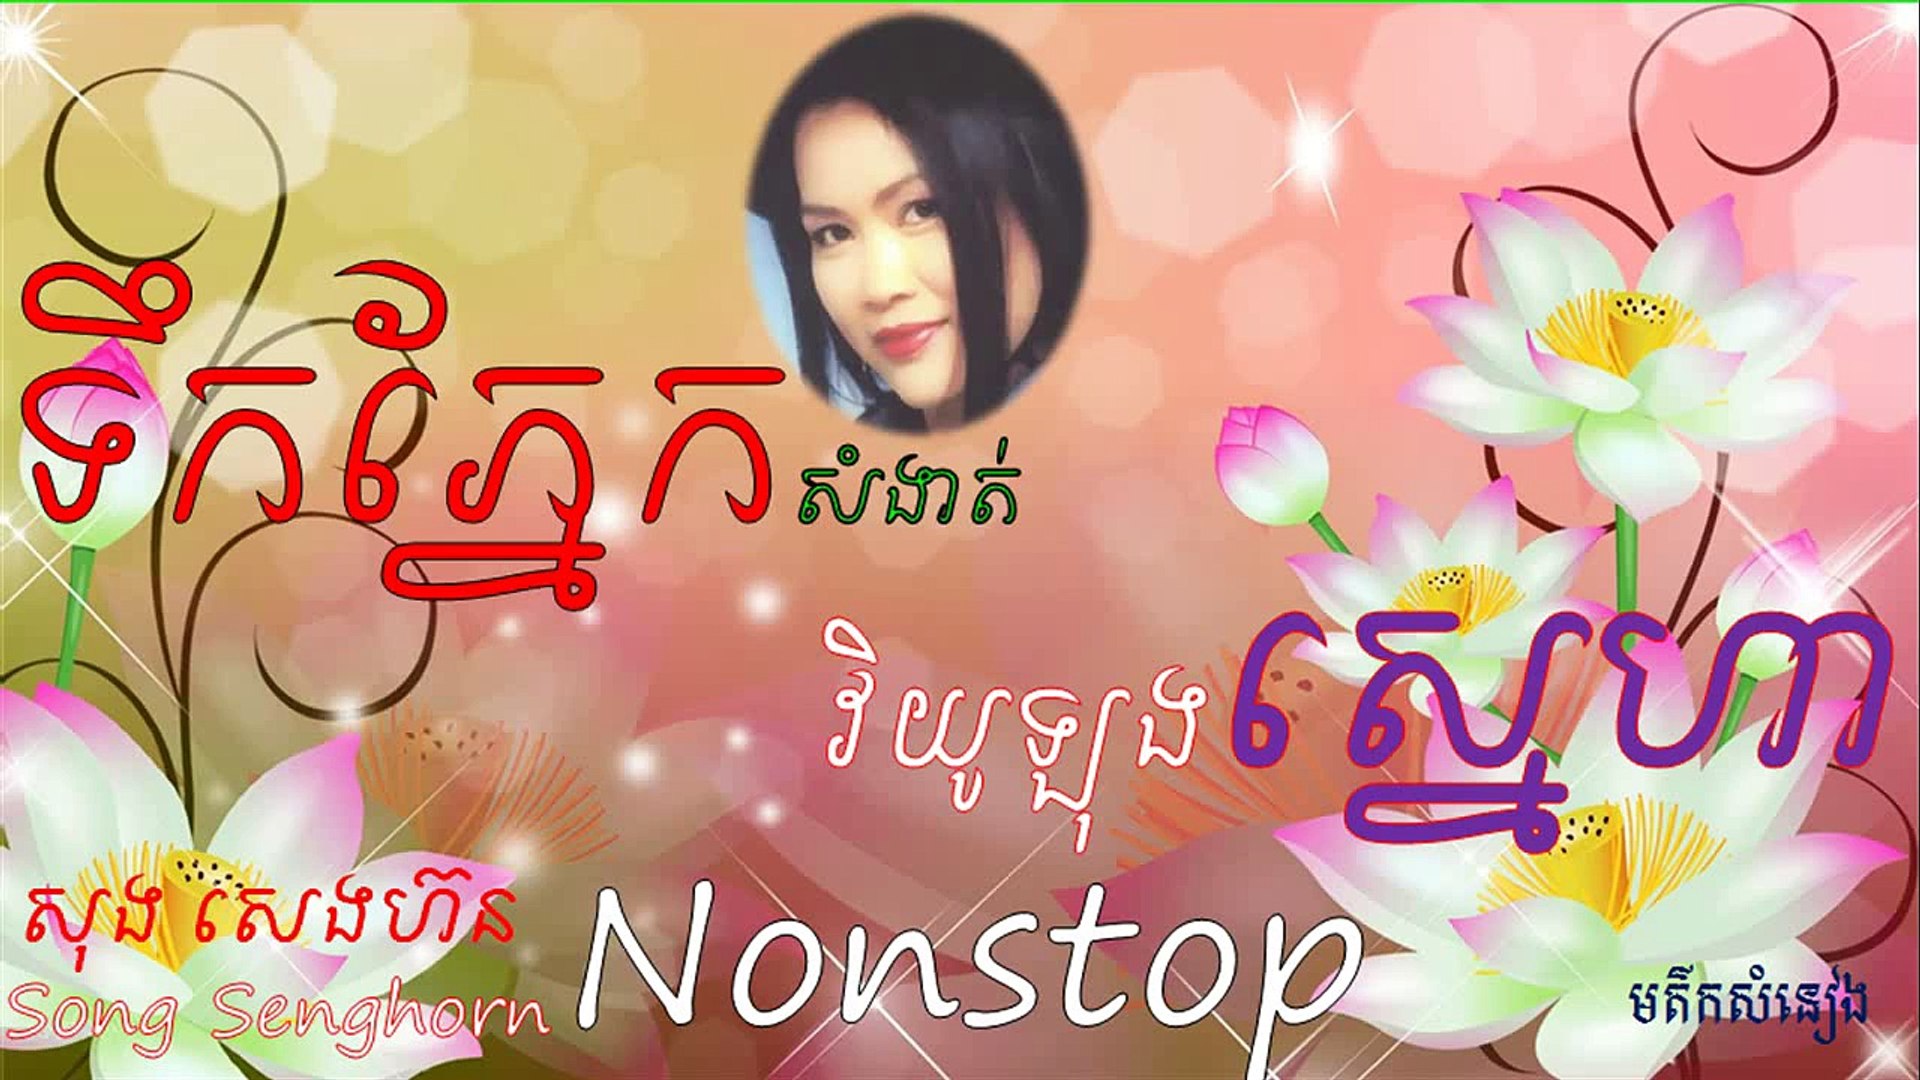 Song Seng Horn Nonstop 38 Best Songs Khmer Song Mp3 Collection -  Dailymotion Video